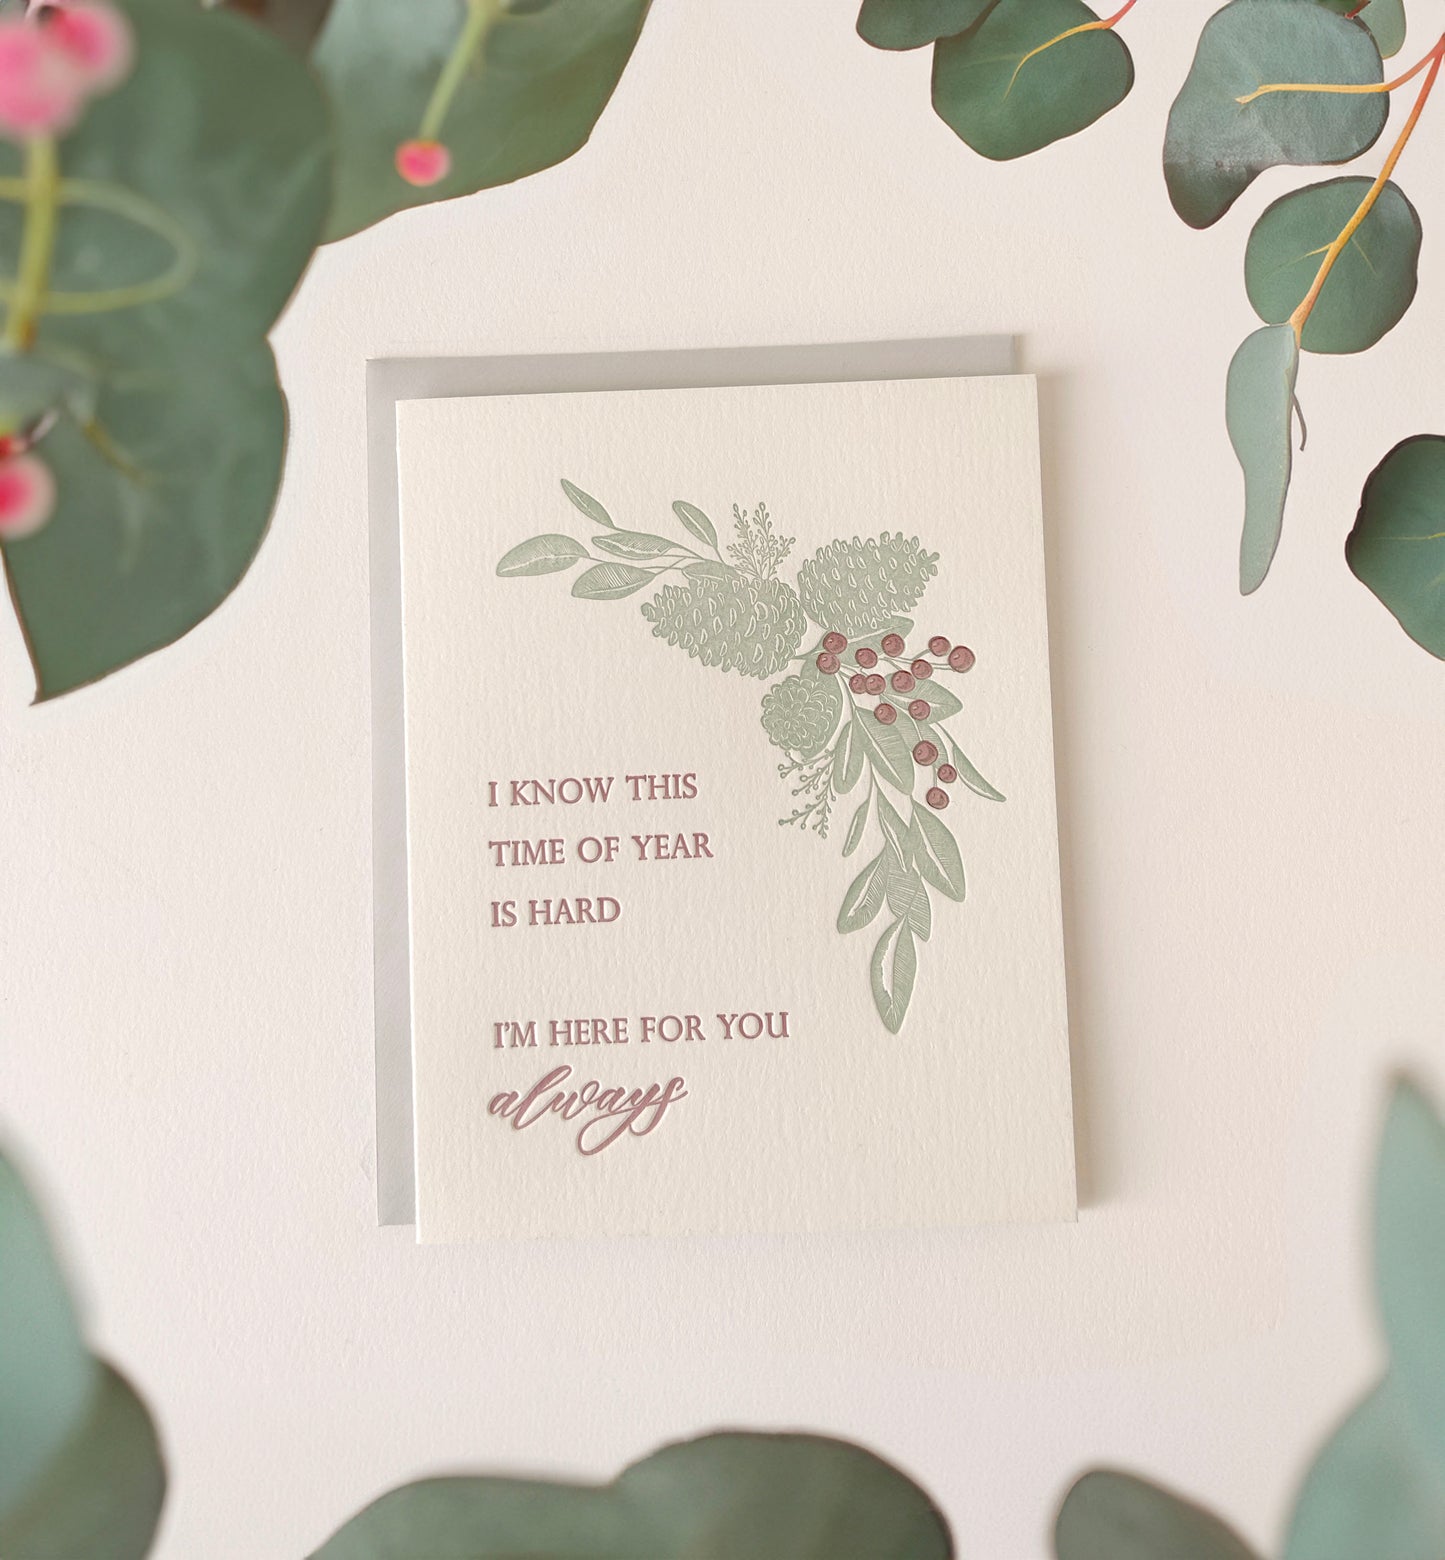 I Know This Time Of Year Is Hard, I'm Here For You Always Letterpress Greeting Card